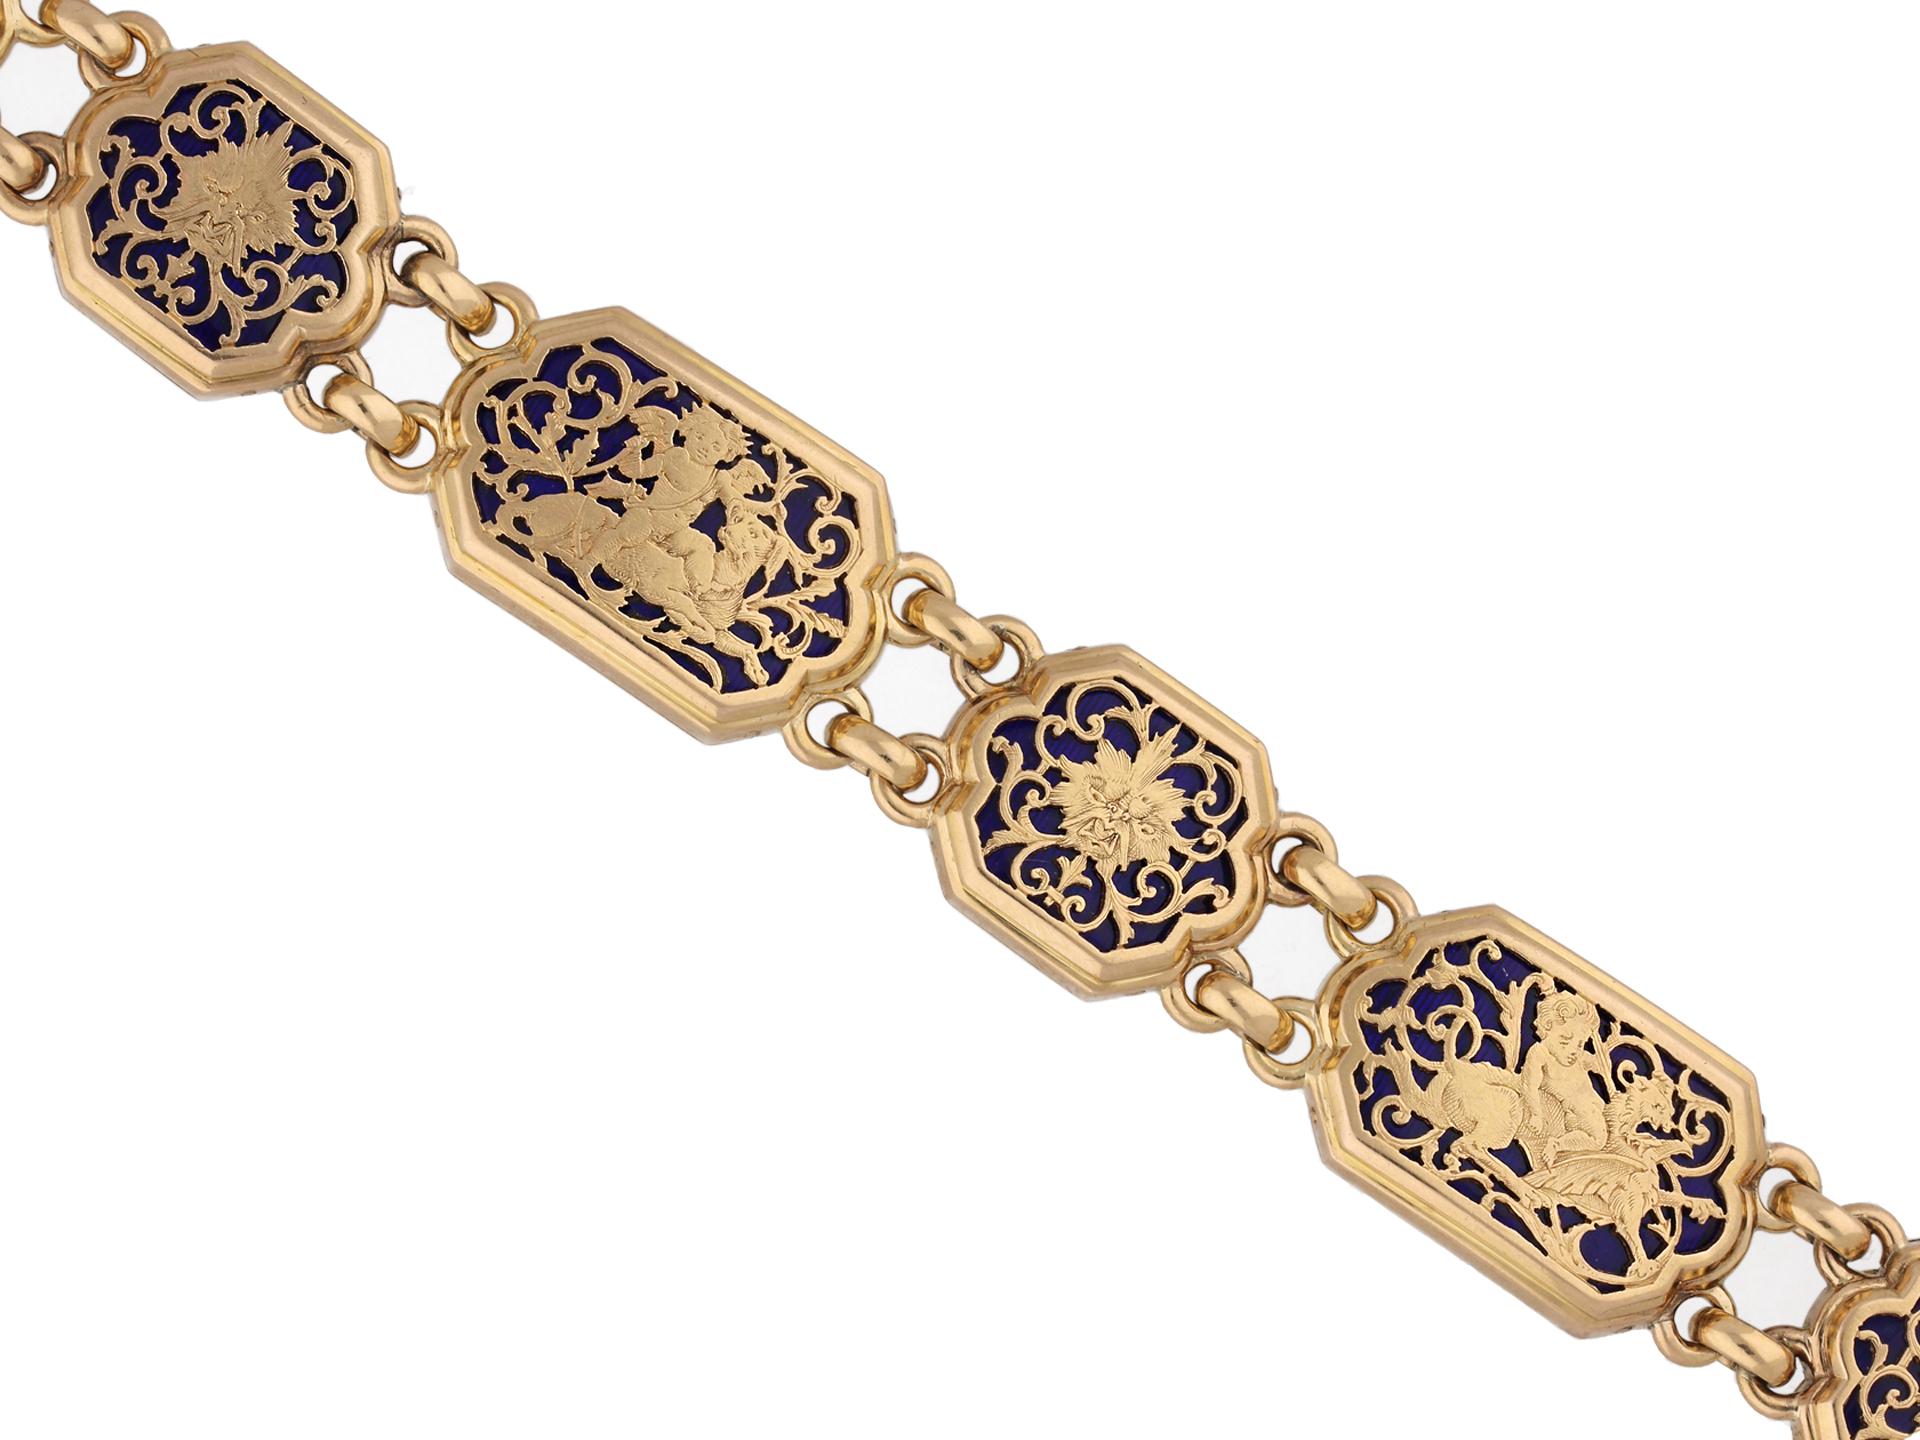 Boucheron guilloché enamel bracelet. A rose gold bracelet composed of eight plaques, the four larger plaques depicting from left to right; a winged cherub on the back of a dragon, a winged cherub sat on the back of a hound, a cherub sat astride a